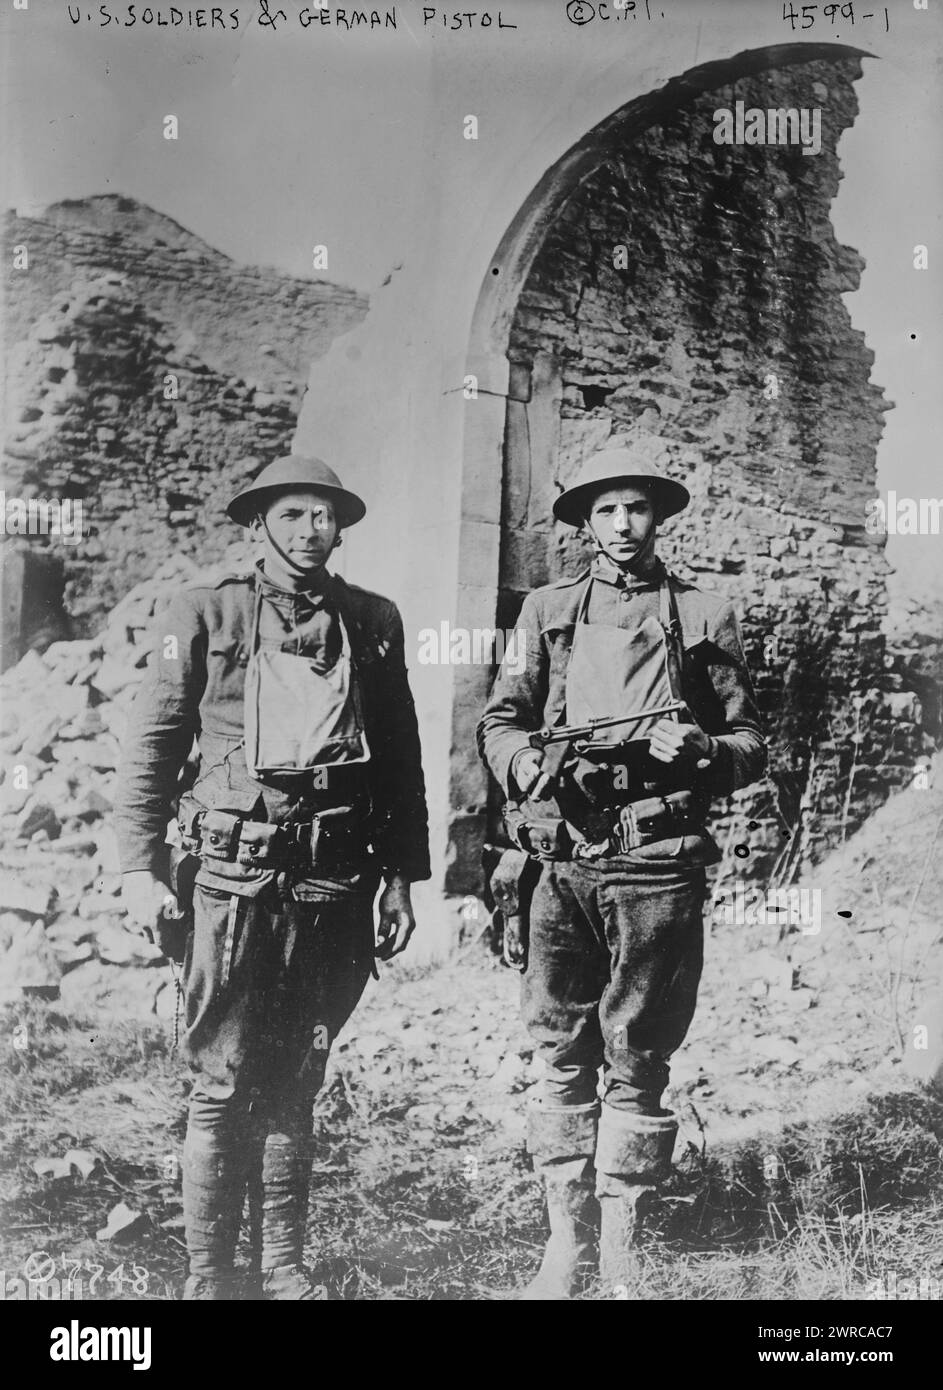 U.S. soldiers & German pistol, Photograph shows two American soldiers, Corporal Howard Thompson and James H. White who were part of a group that killed and captured several Germans in no man's land on March 7, 1918 during World War I. Thompson holds a pistol taken from a German soldier killed by White. Photograph was taken in Ancerviller, France, March 11, 1918., 1918 March 11, World War, 1914-1918, Glass negatives, 1 negative: glass Stock Photo